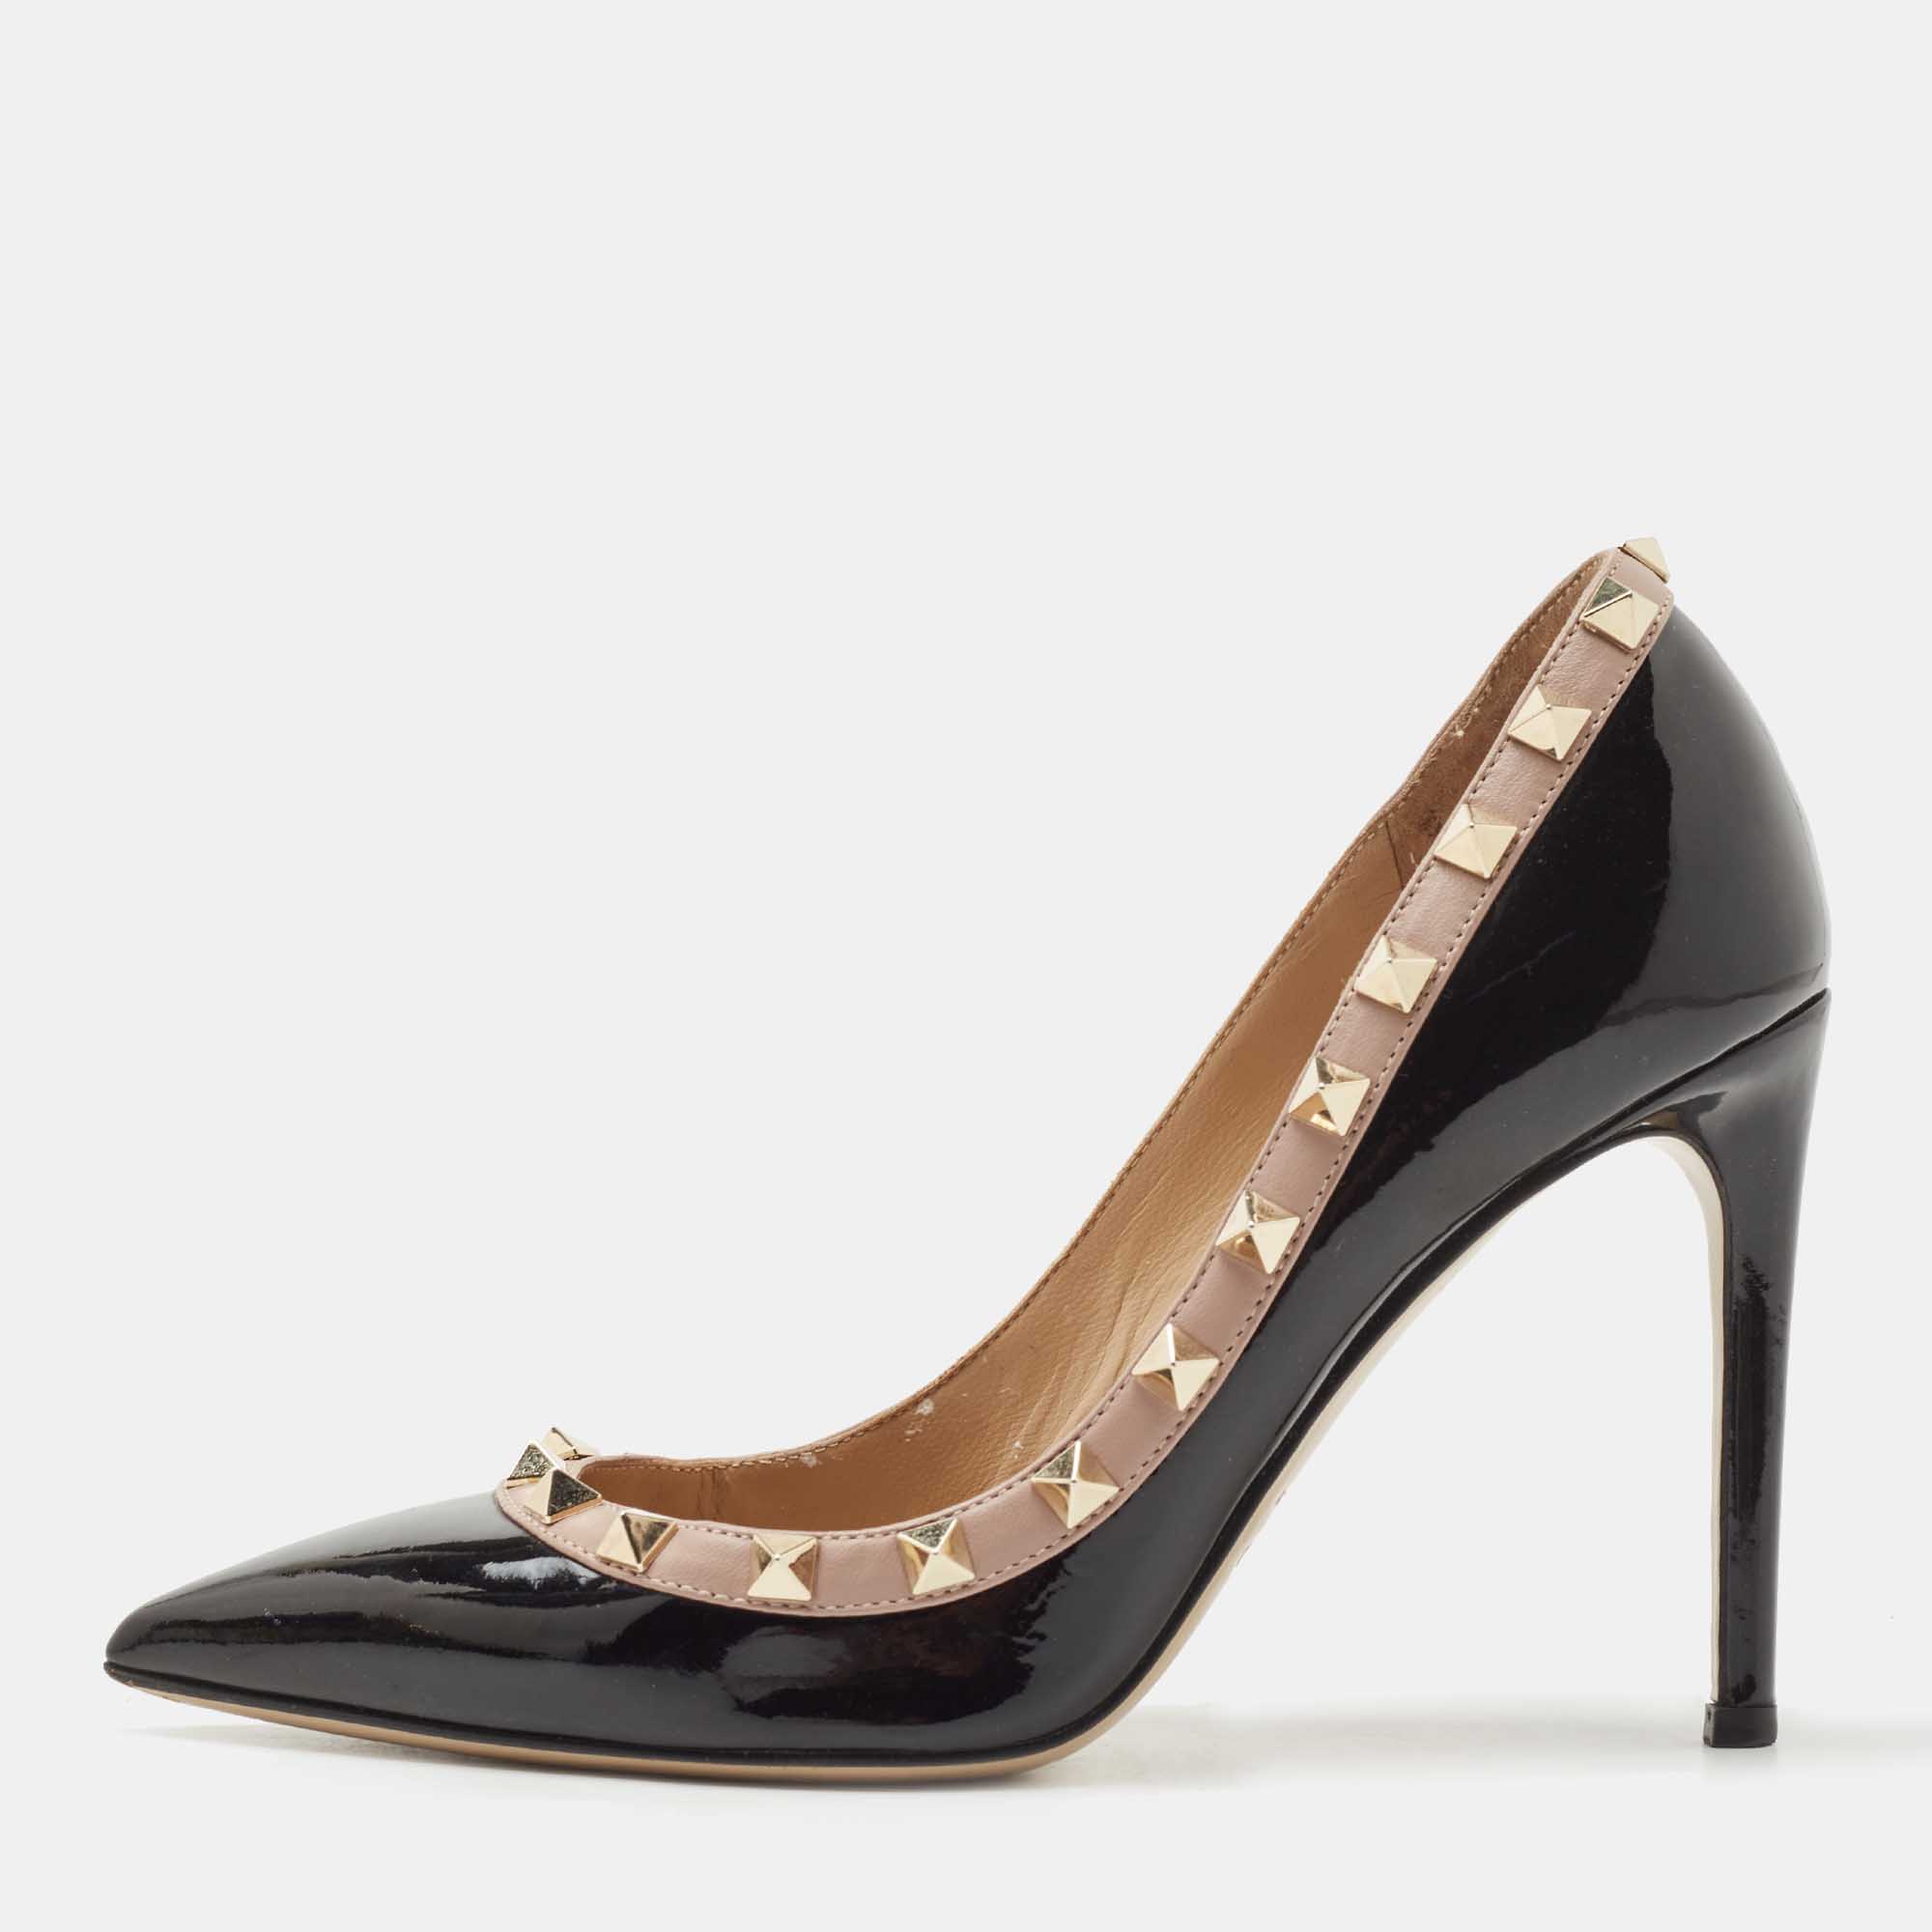 Valentino Black/Beige Patent and Leather Rockstud  Pumps Size 35